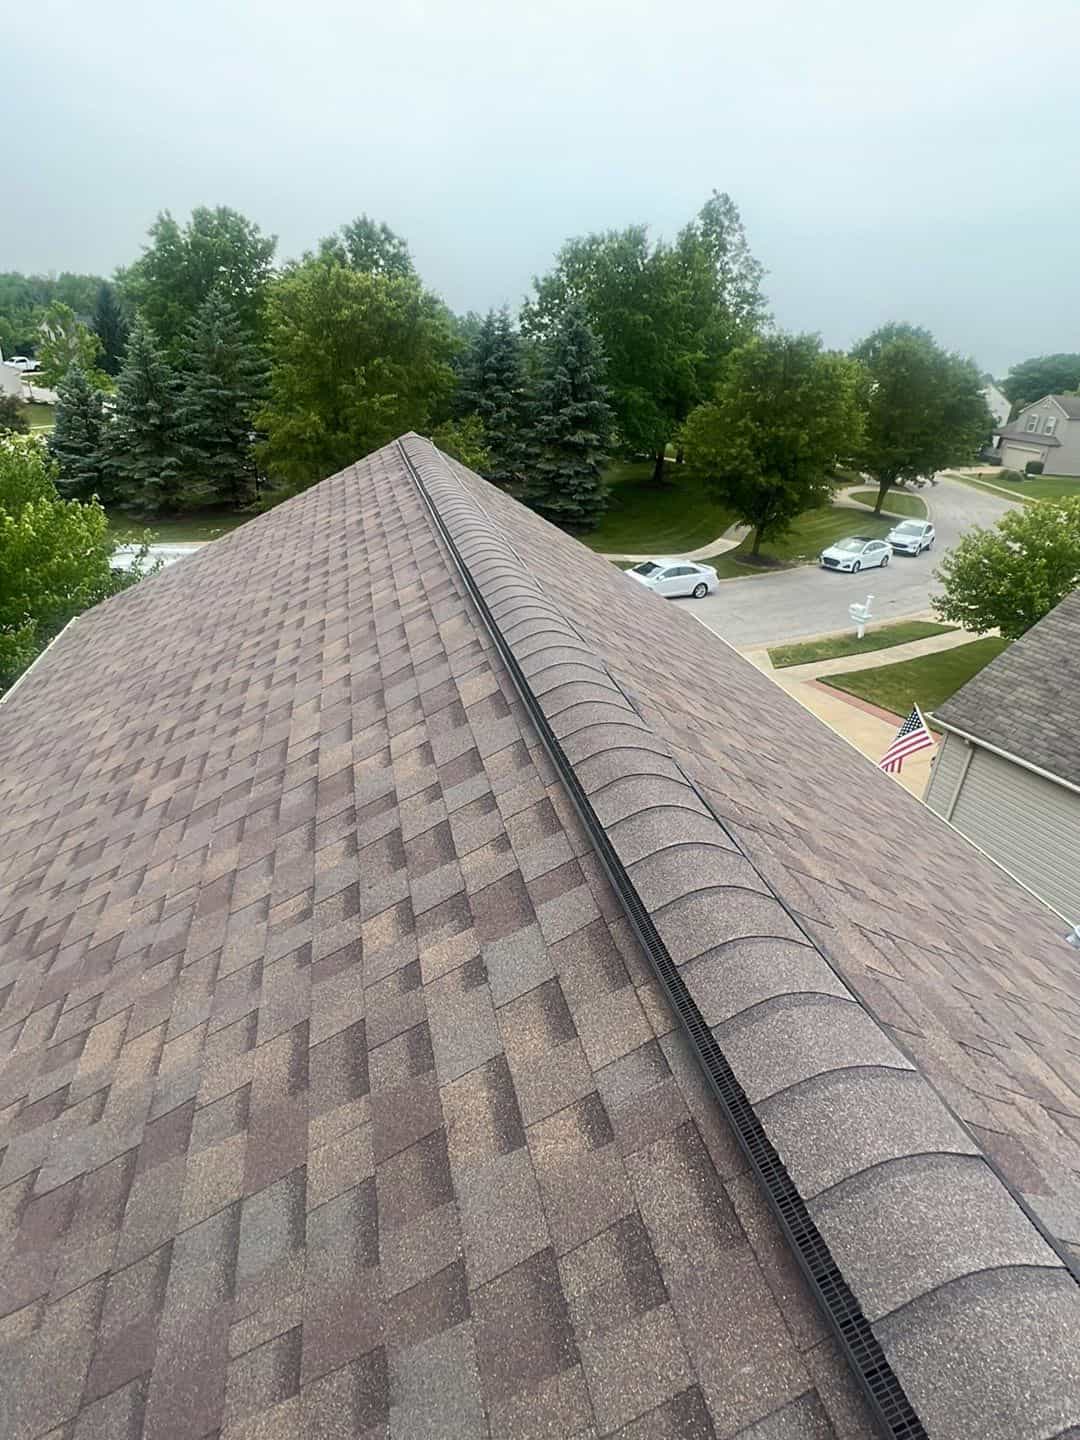 Aerial view of a shingled roof undergoing work.